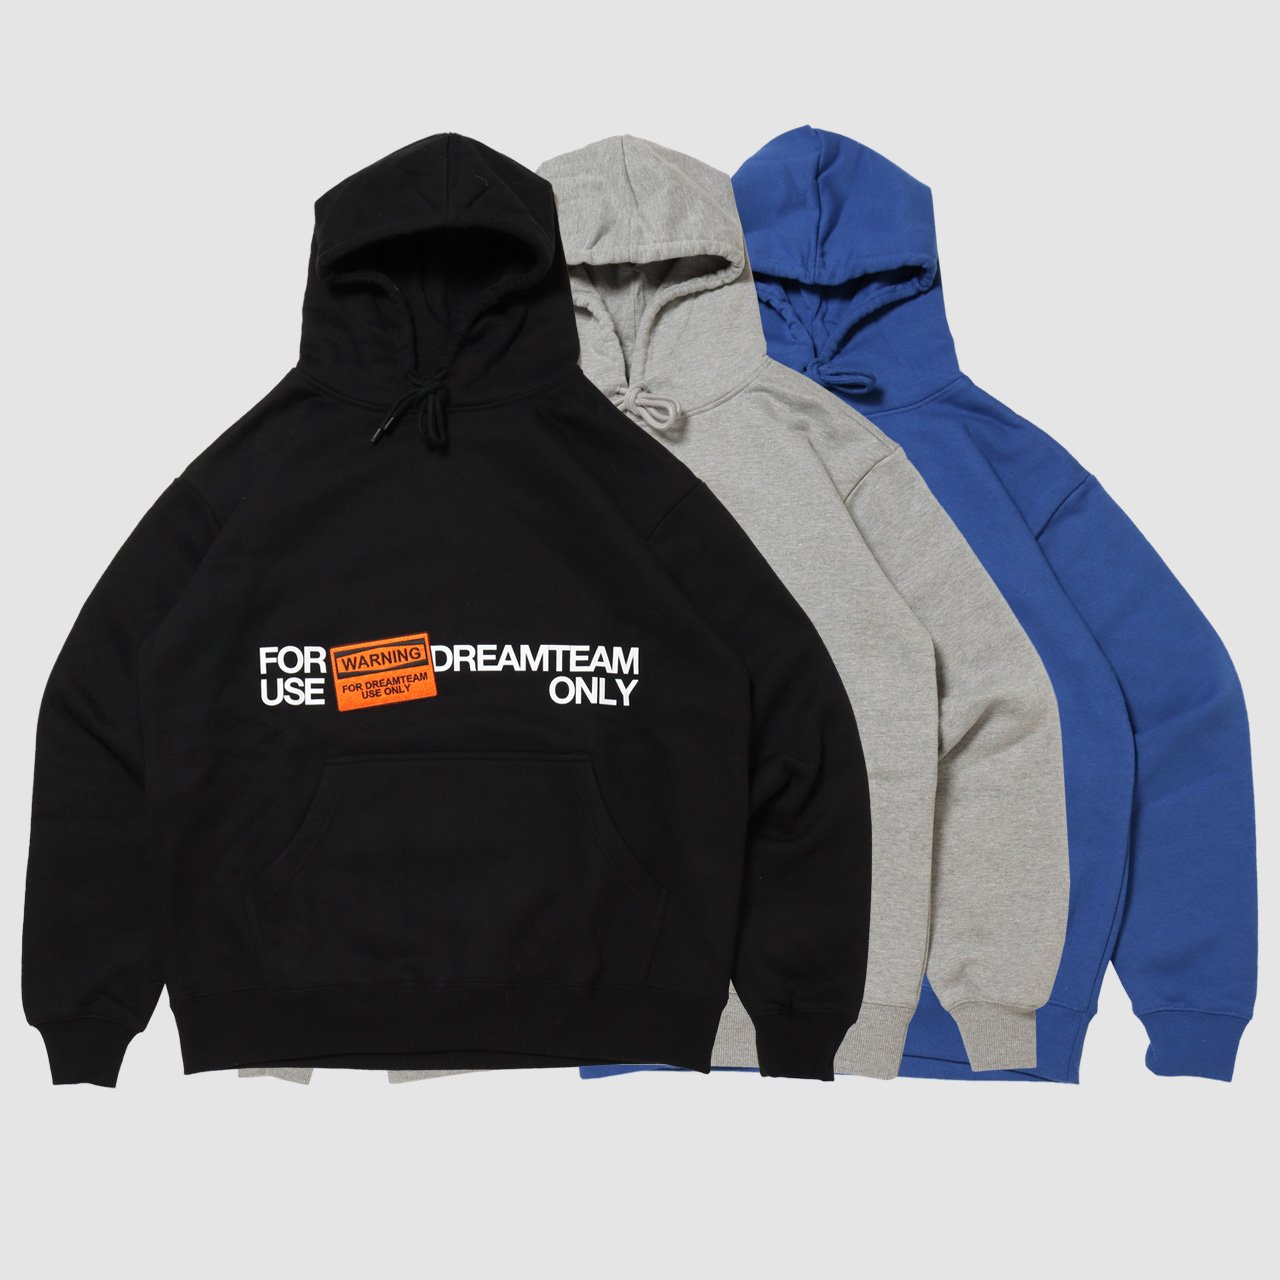 <img class='new_mark_img1' src='https://img.shop-pro.jp/img/new/icons20.gif' style='border:none;display:inline;margin:0px;padding:0px;width:auto;' />WARNING DT Use Only Hooded Pullover